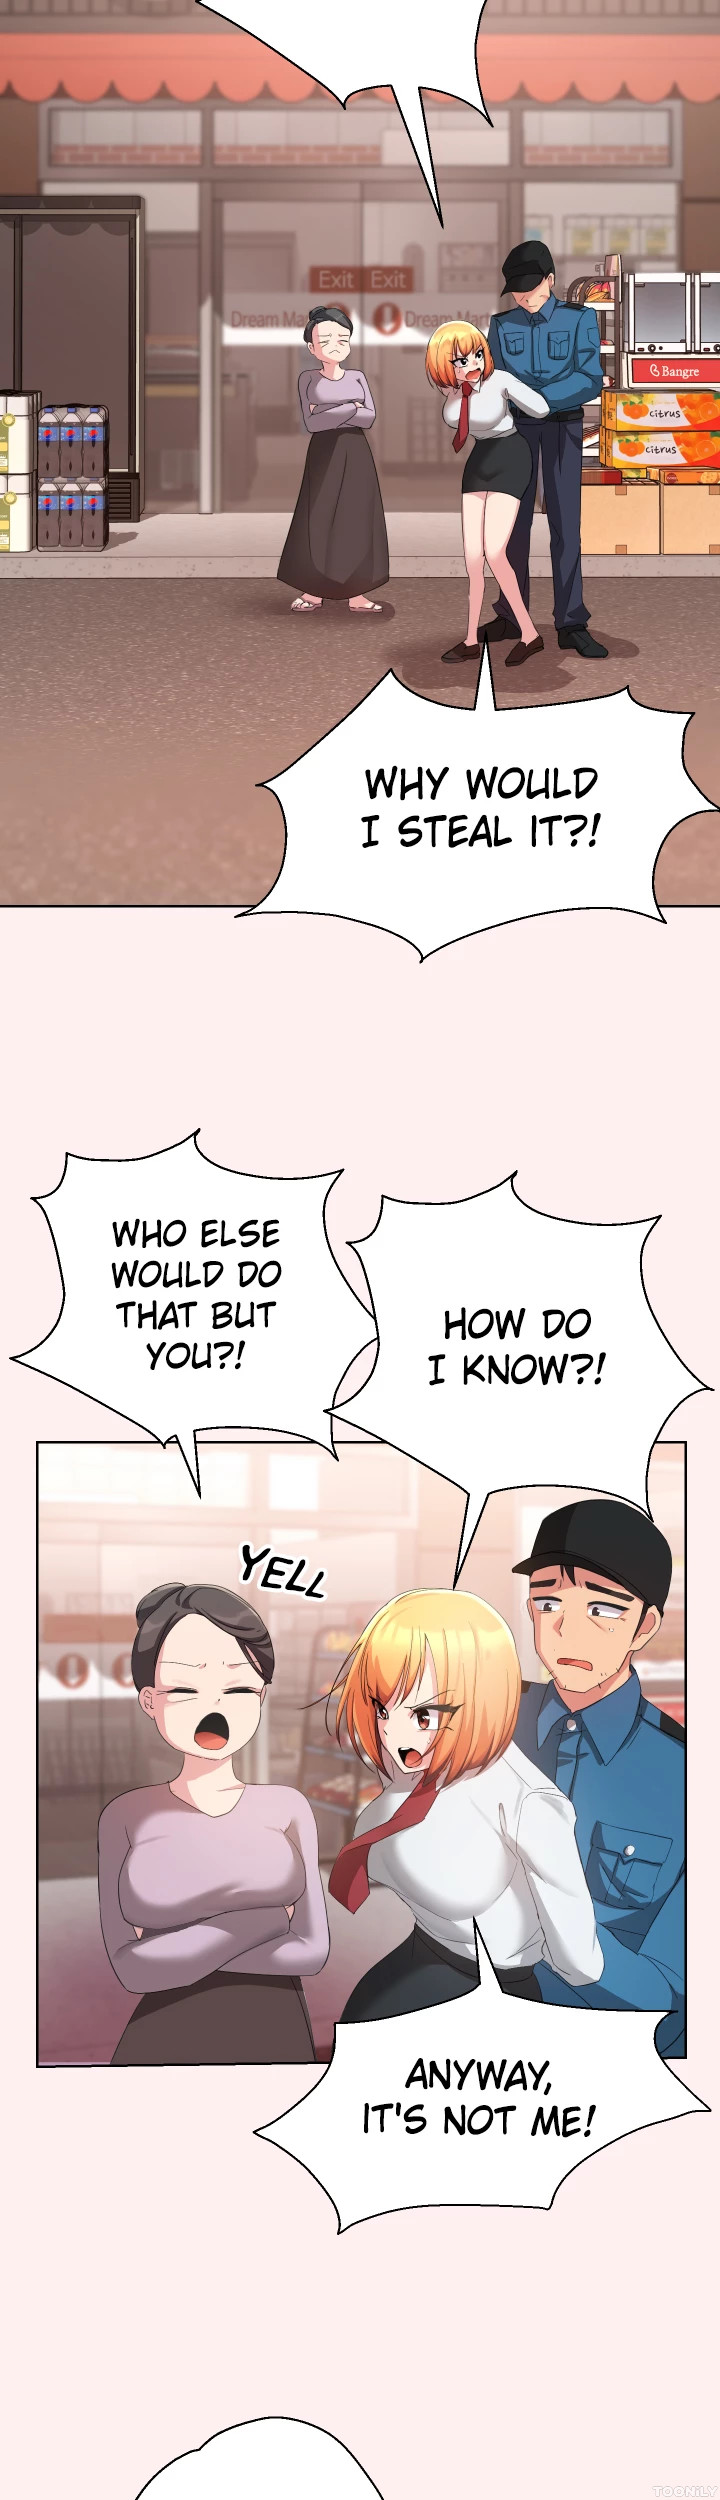 Girls I Used to Teach - Chapter 3 Page 15